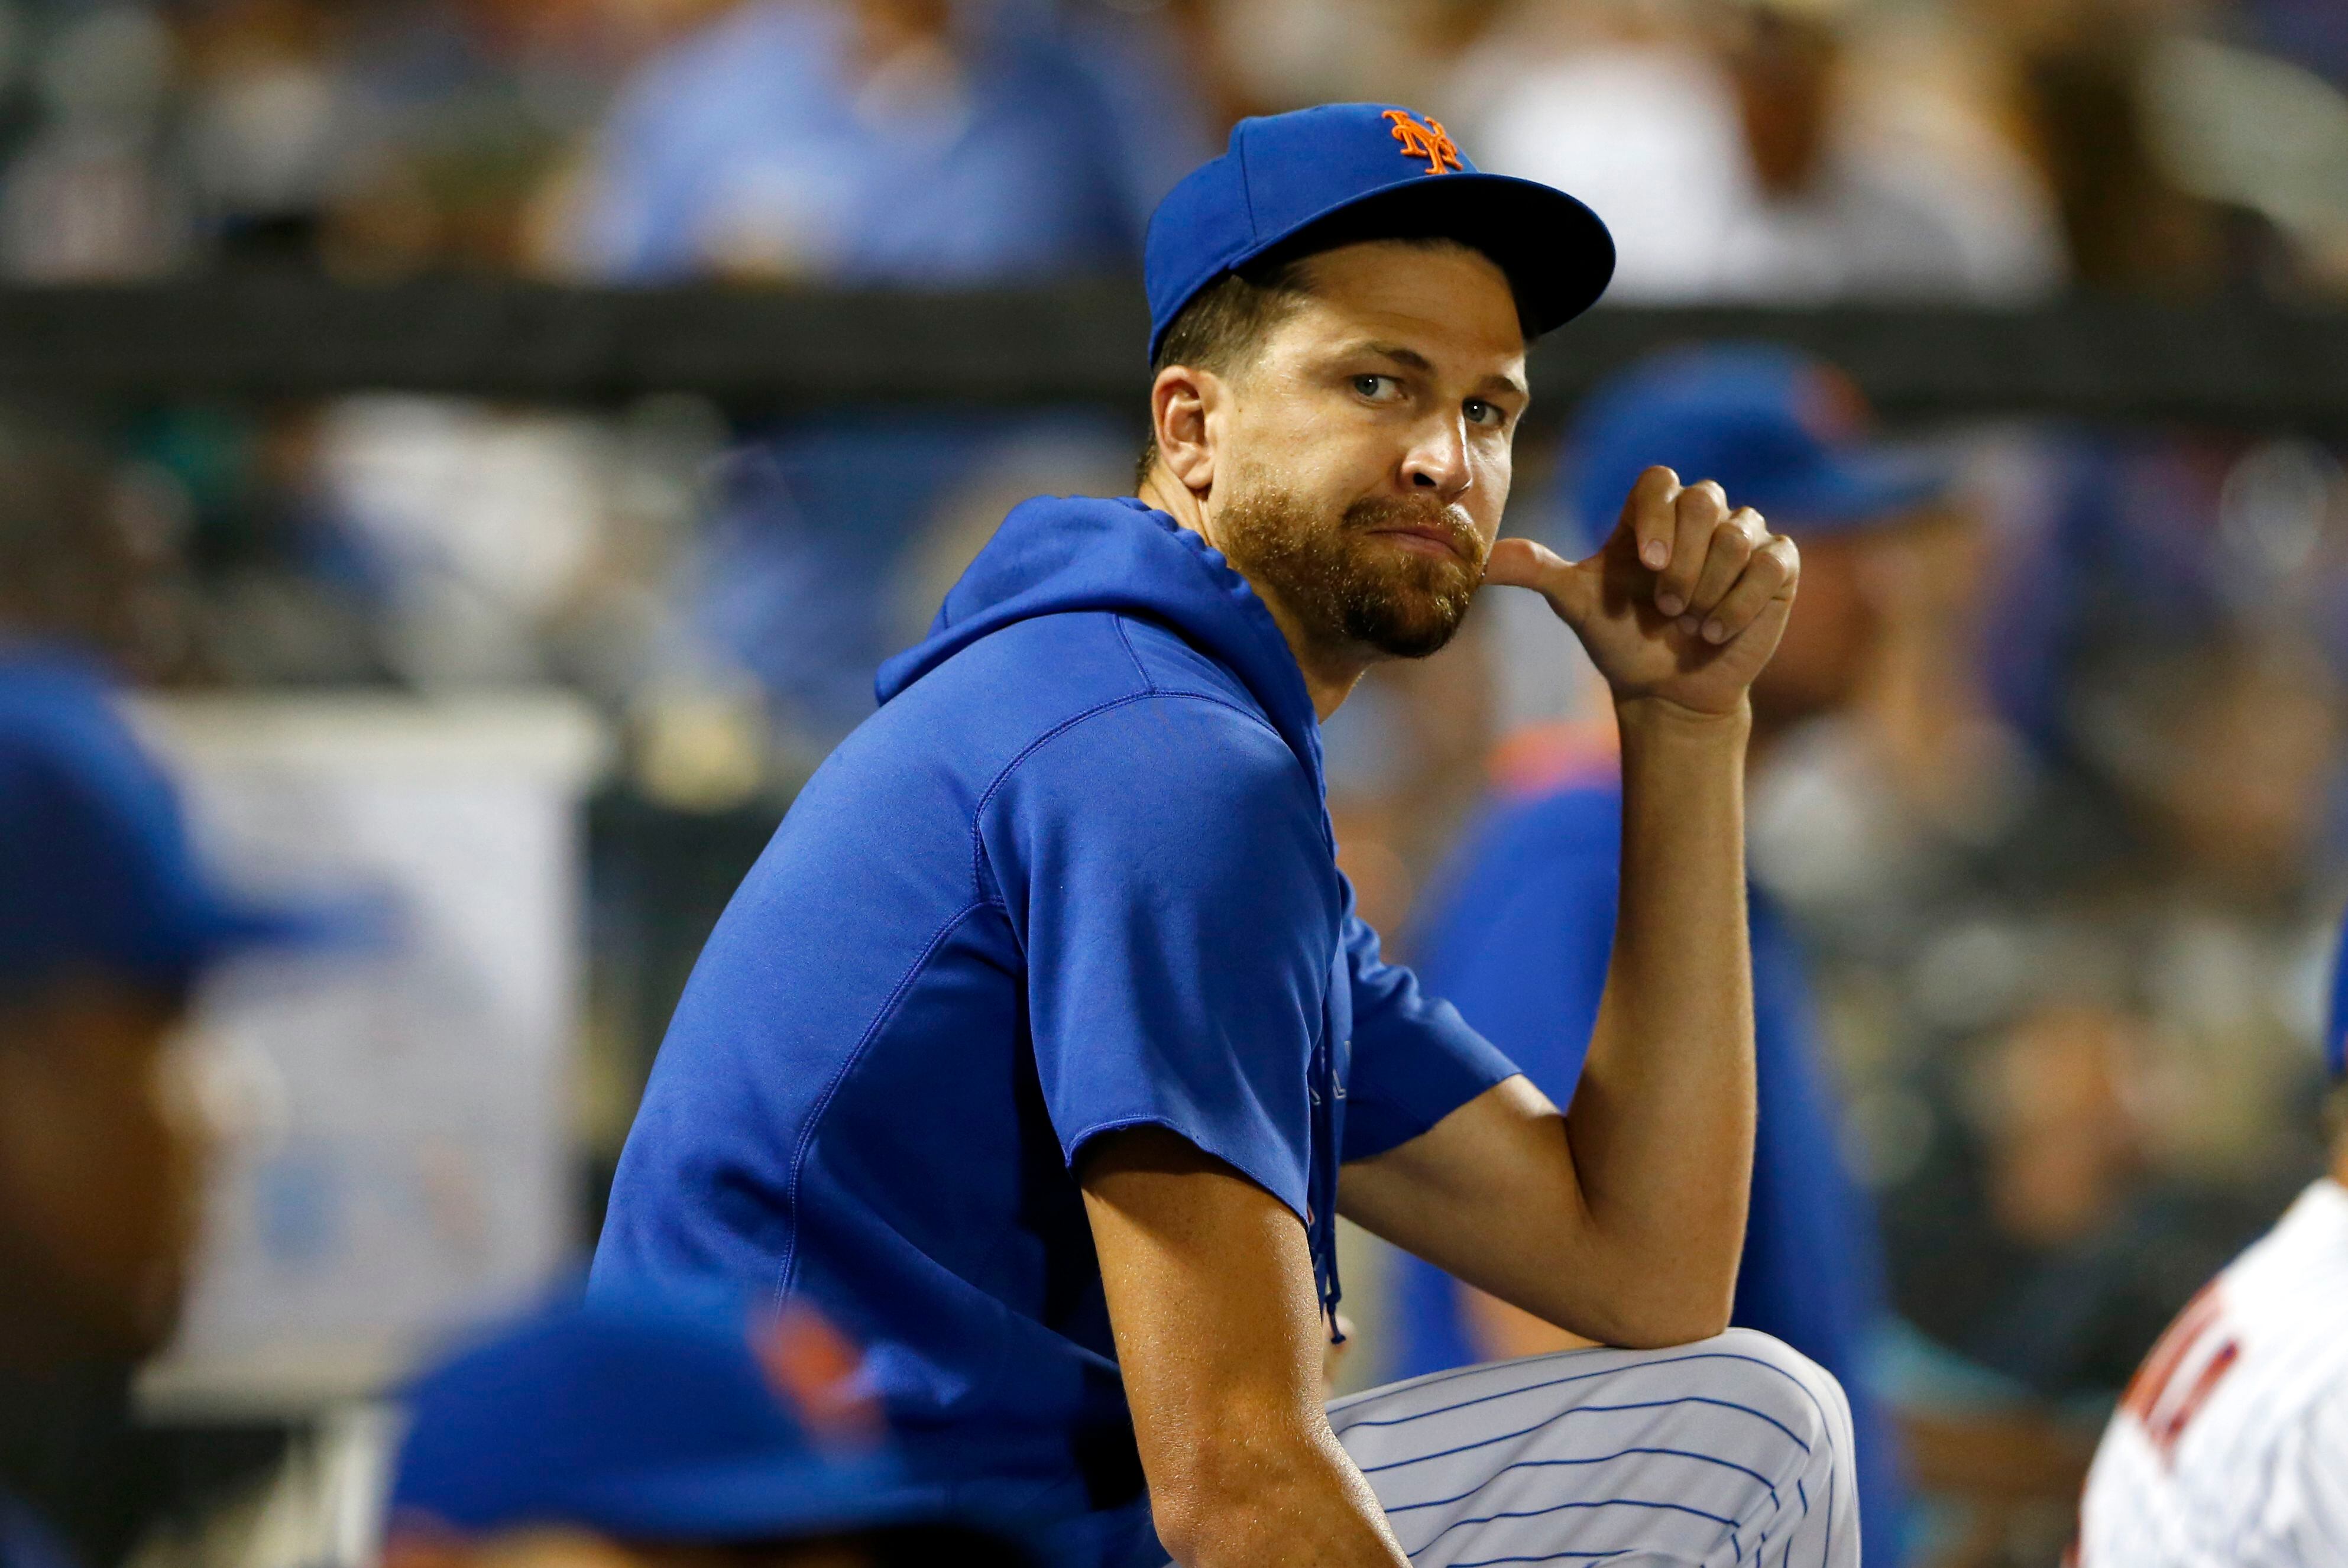 Jacob deGrom vs. Pitchers at the Plate Is the Most Lopsided